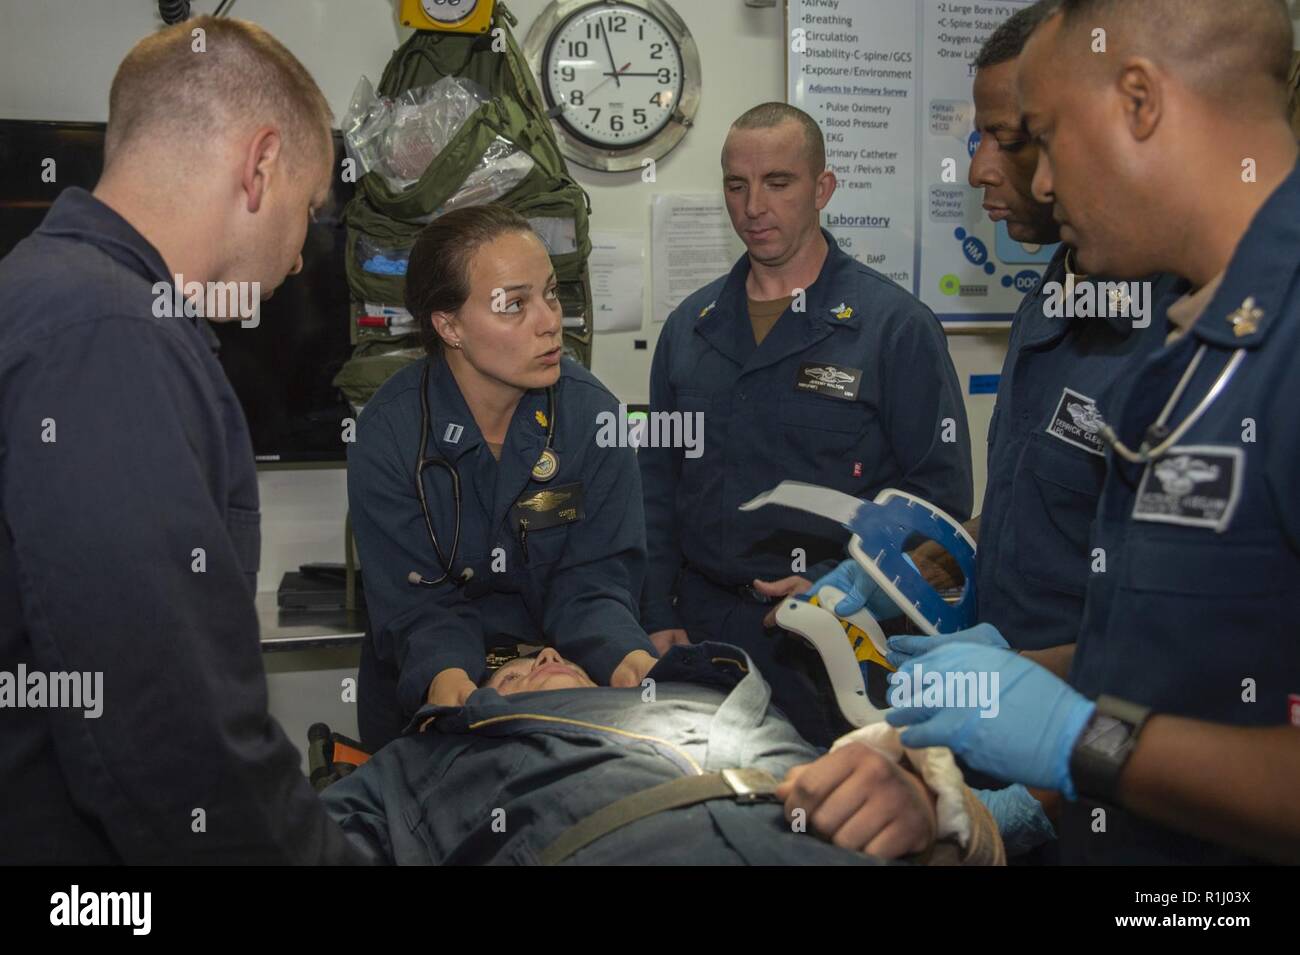 PACIFIC OCEAN (Sept. 21, 2018) Lt. Katherine Cortez, from Broken Arrow, Okla., discussess triage procedures with Sailors during a mass casualty drill in the medical triage room of the amphibious assault ship USS Bonhomme Richard (LHD 6). Bonhomme Richard is currently underway in the U.S. 3rd Fleet area of operations. Stock Photo